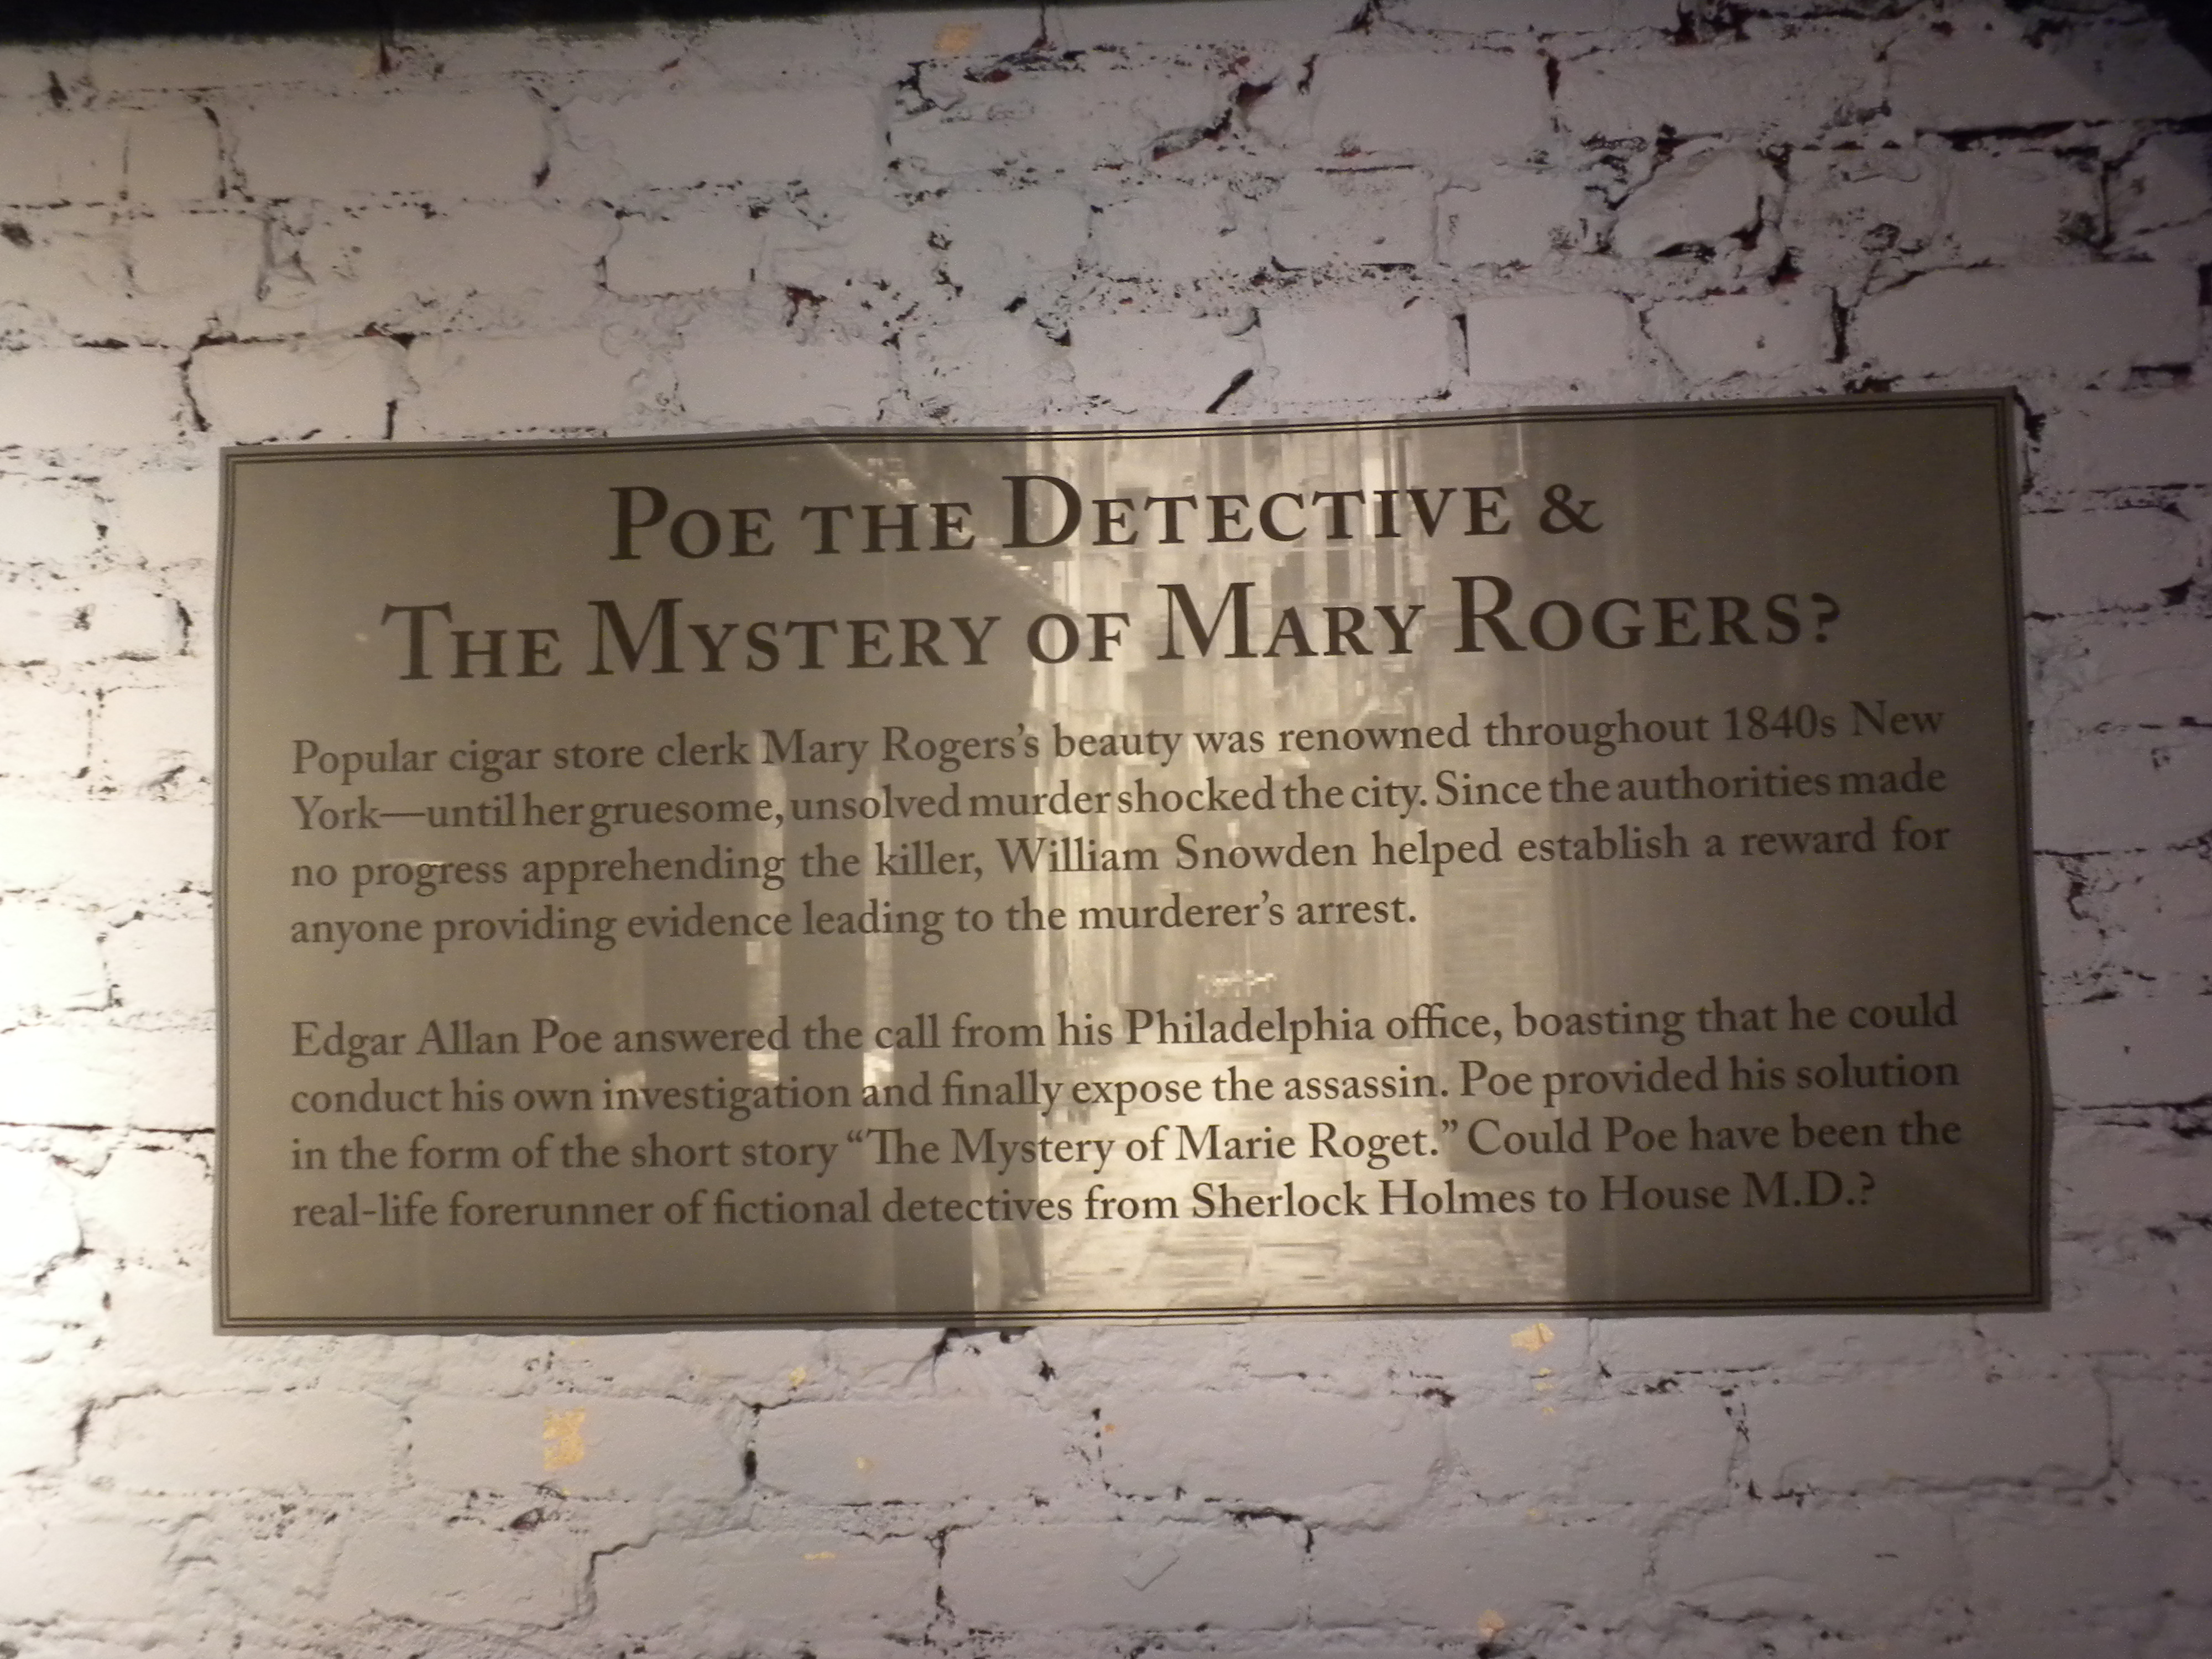 A plaque about the detective story of Mary Rogers by Poe. 